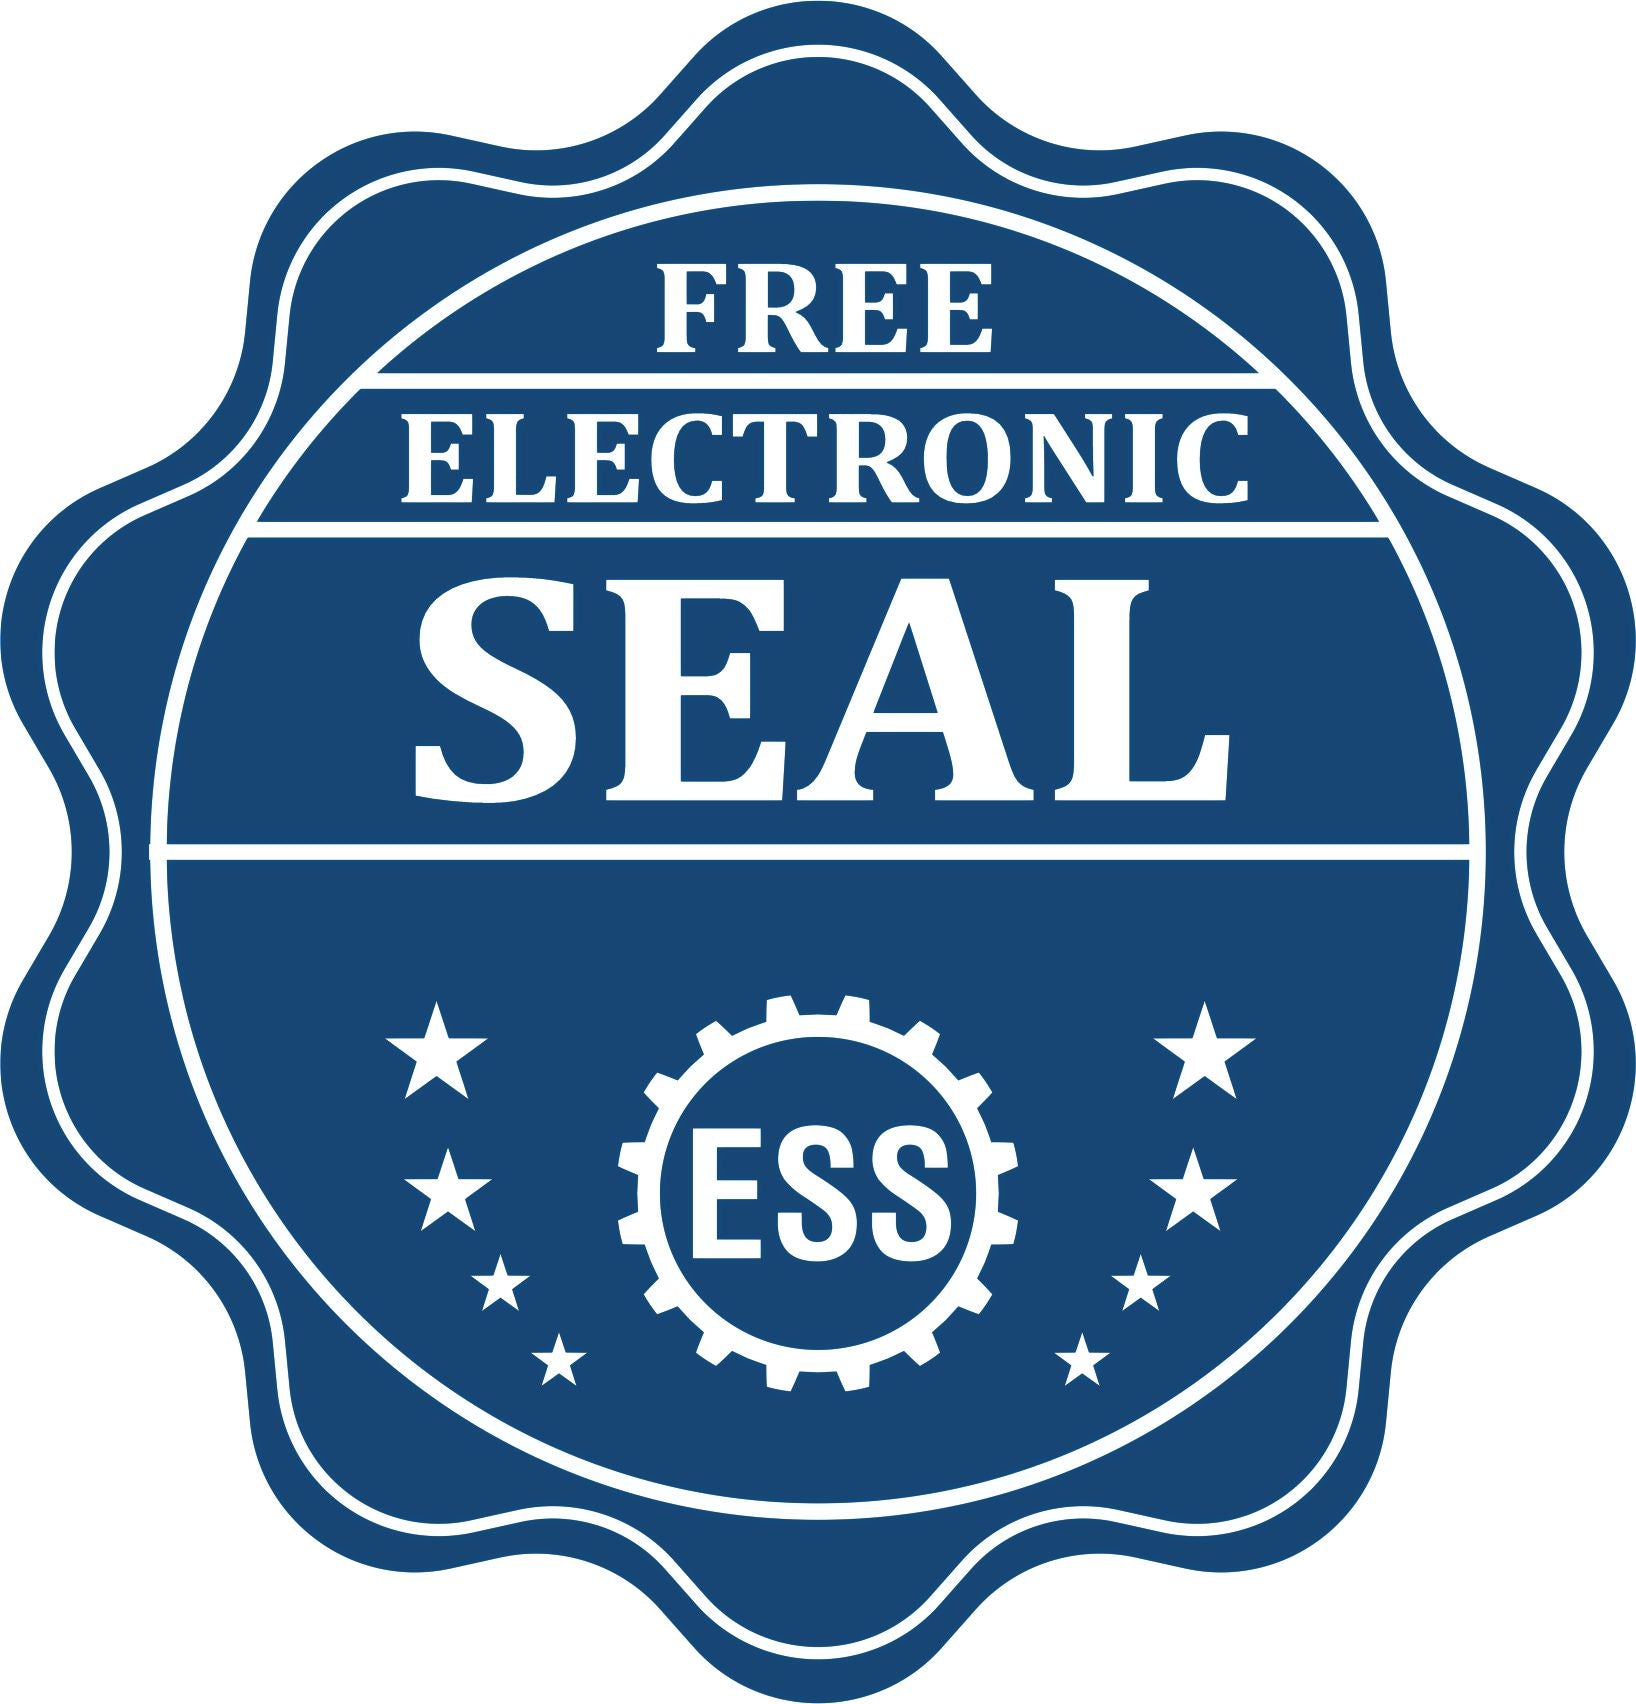 A badge showing a free electronic seal for the Self-Inking Guam Landscape Architect Stamp with stars and the ESS gear on the emblem.